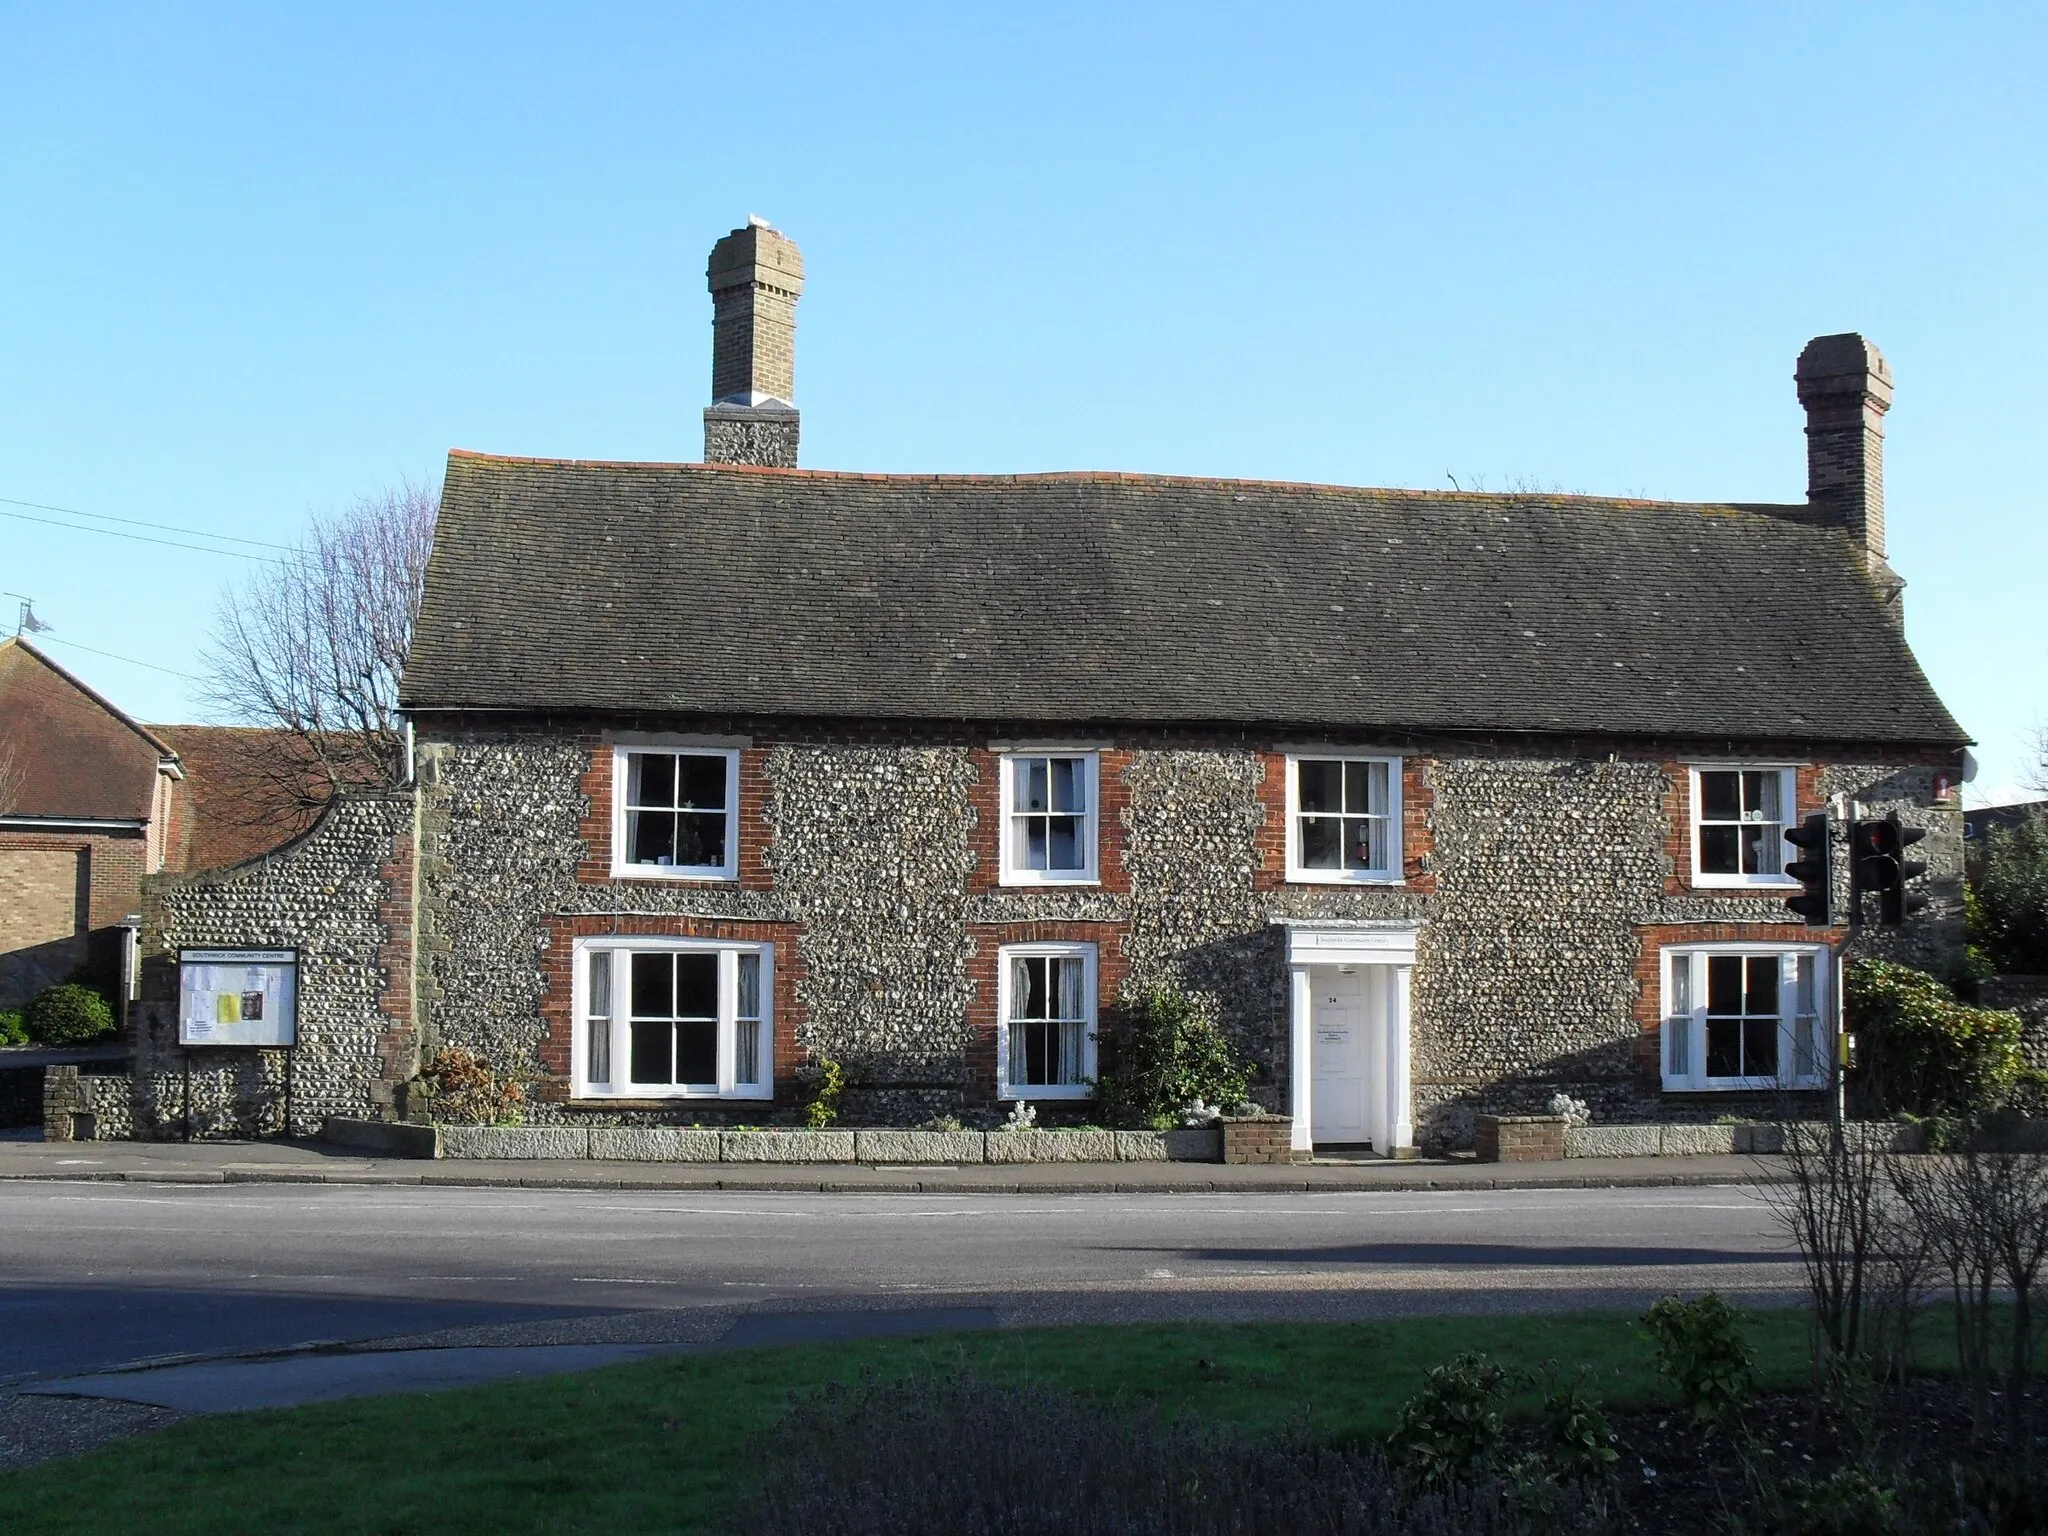 Photo showing: Southwick Community Centre, 24 Southwick Street, Southwick, Adur, West Sussex, England.

Listed at Grade II by English Heritage (IoE Code 297364)